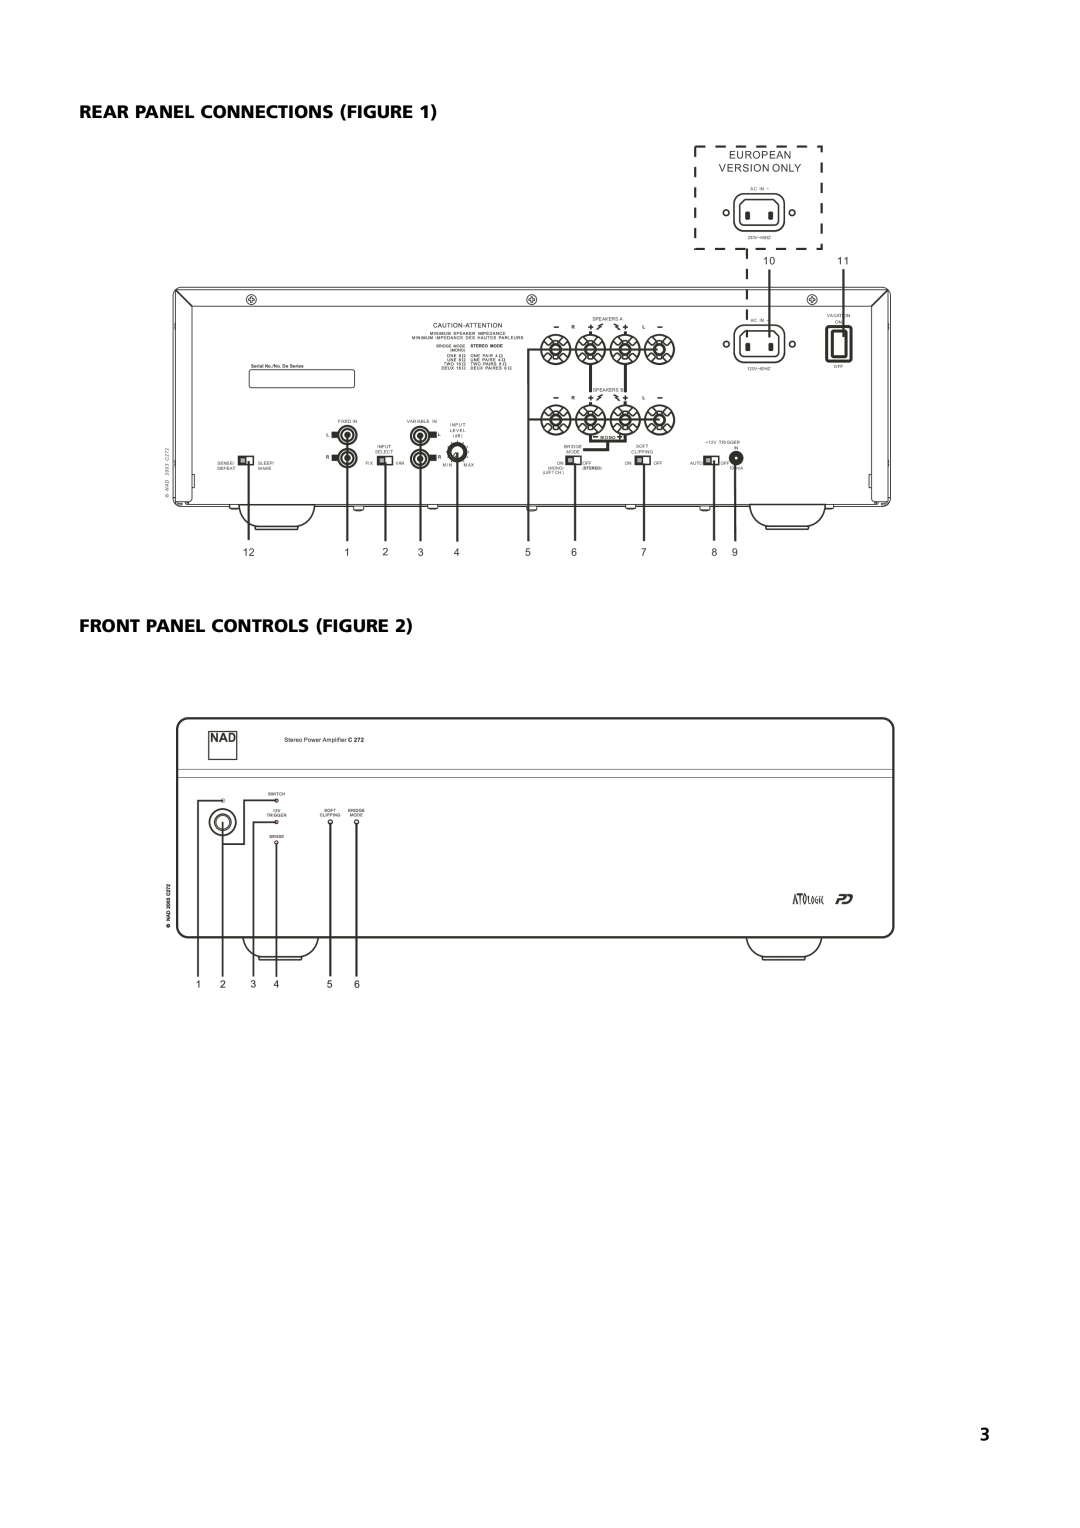 NAD C 272 owner manual Rear Panel Connections Figure, Front Panel Controls Figure 